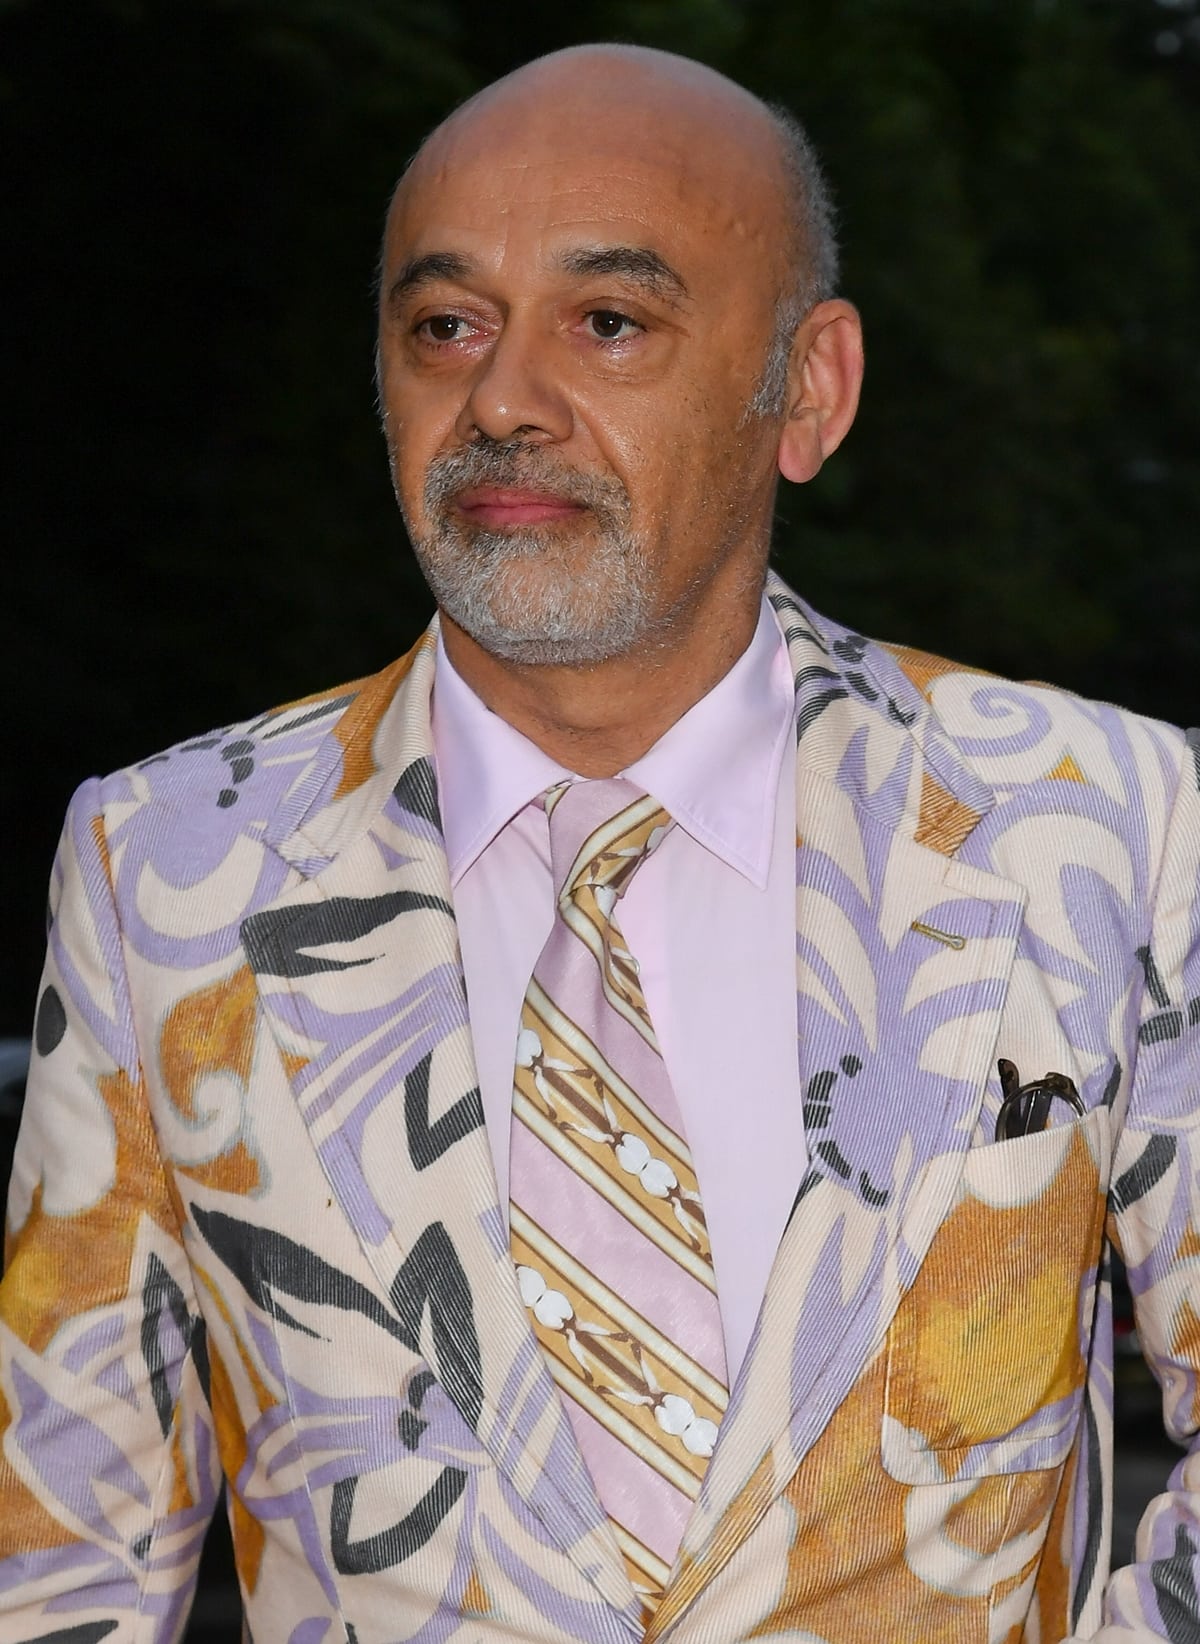 Christian Louboutin sued Yves Saint Laurent for copying his signature red soles